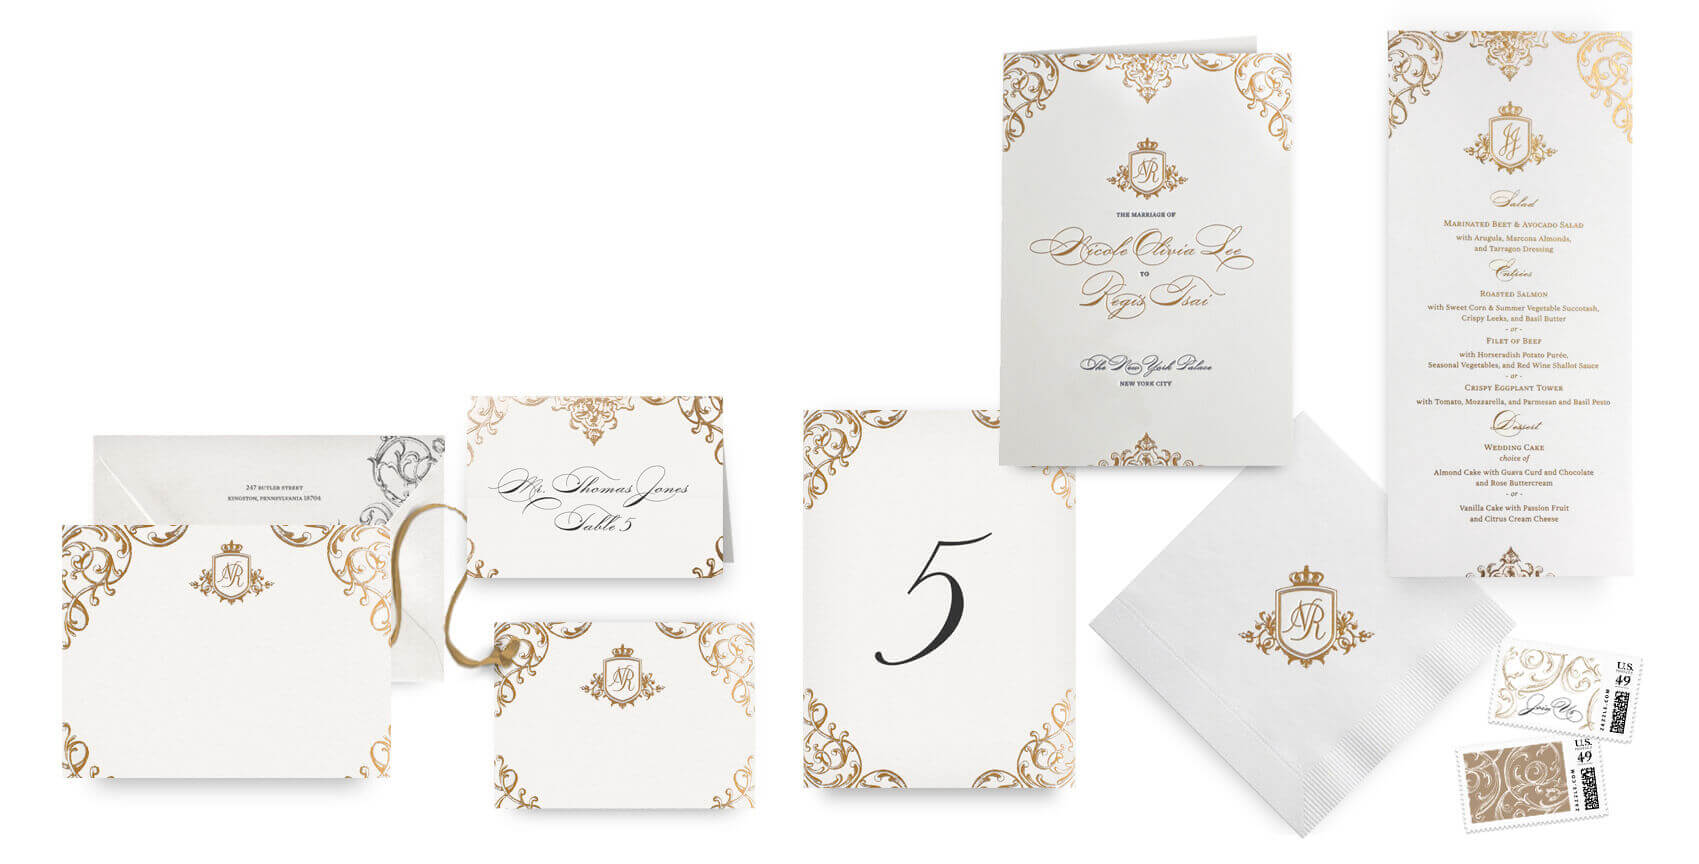 Ornate gold menus, programs and wedding accessories